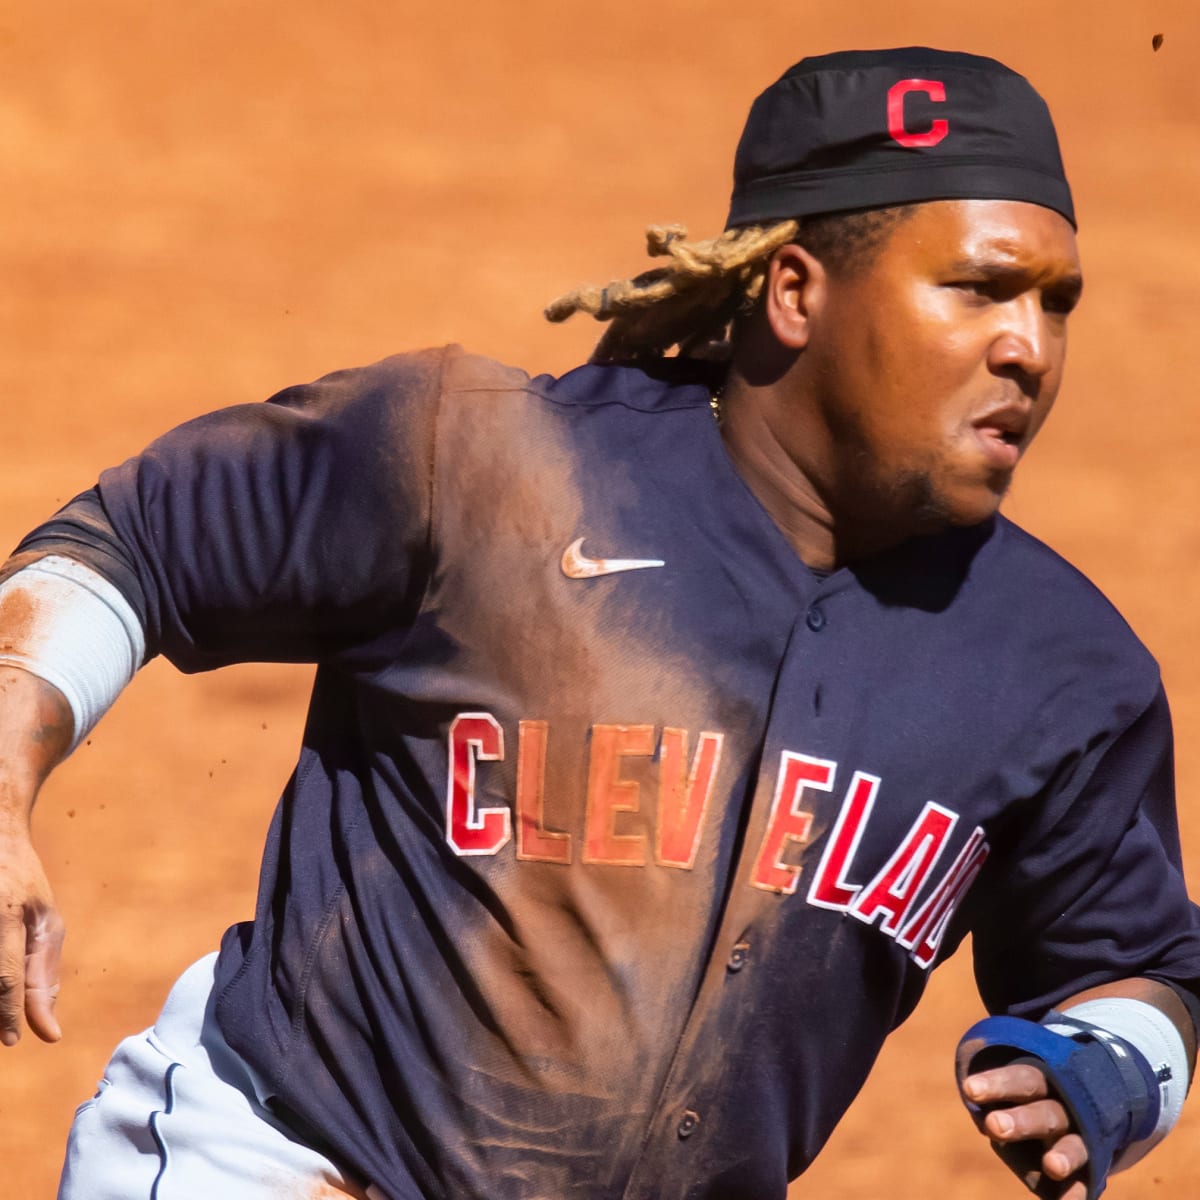 Cleveland Indians set 2020 opening day roster; Jake Bauers, Hunter